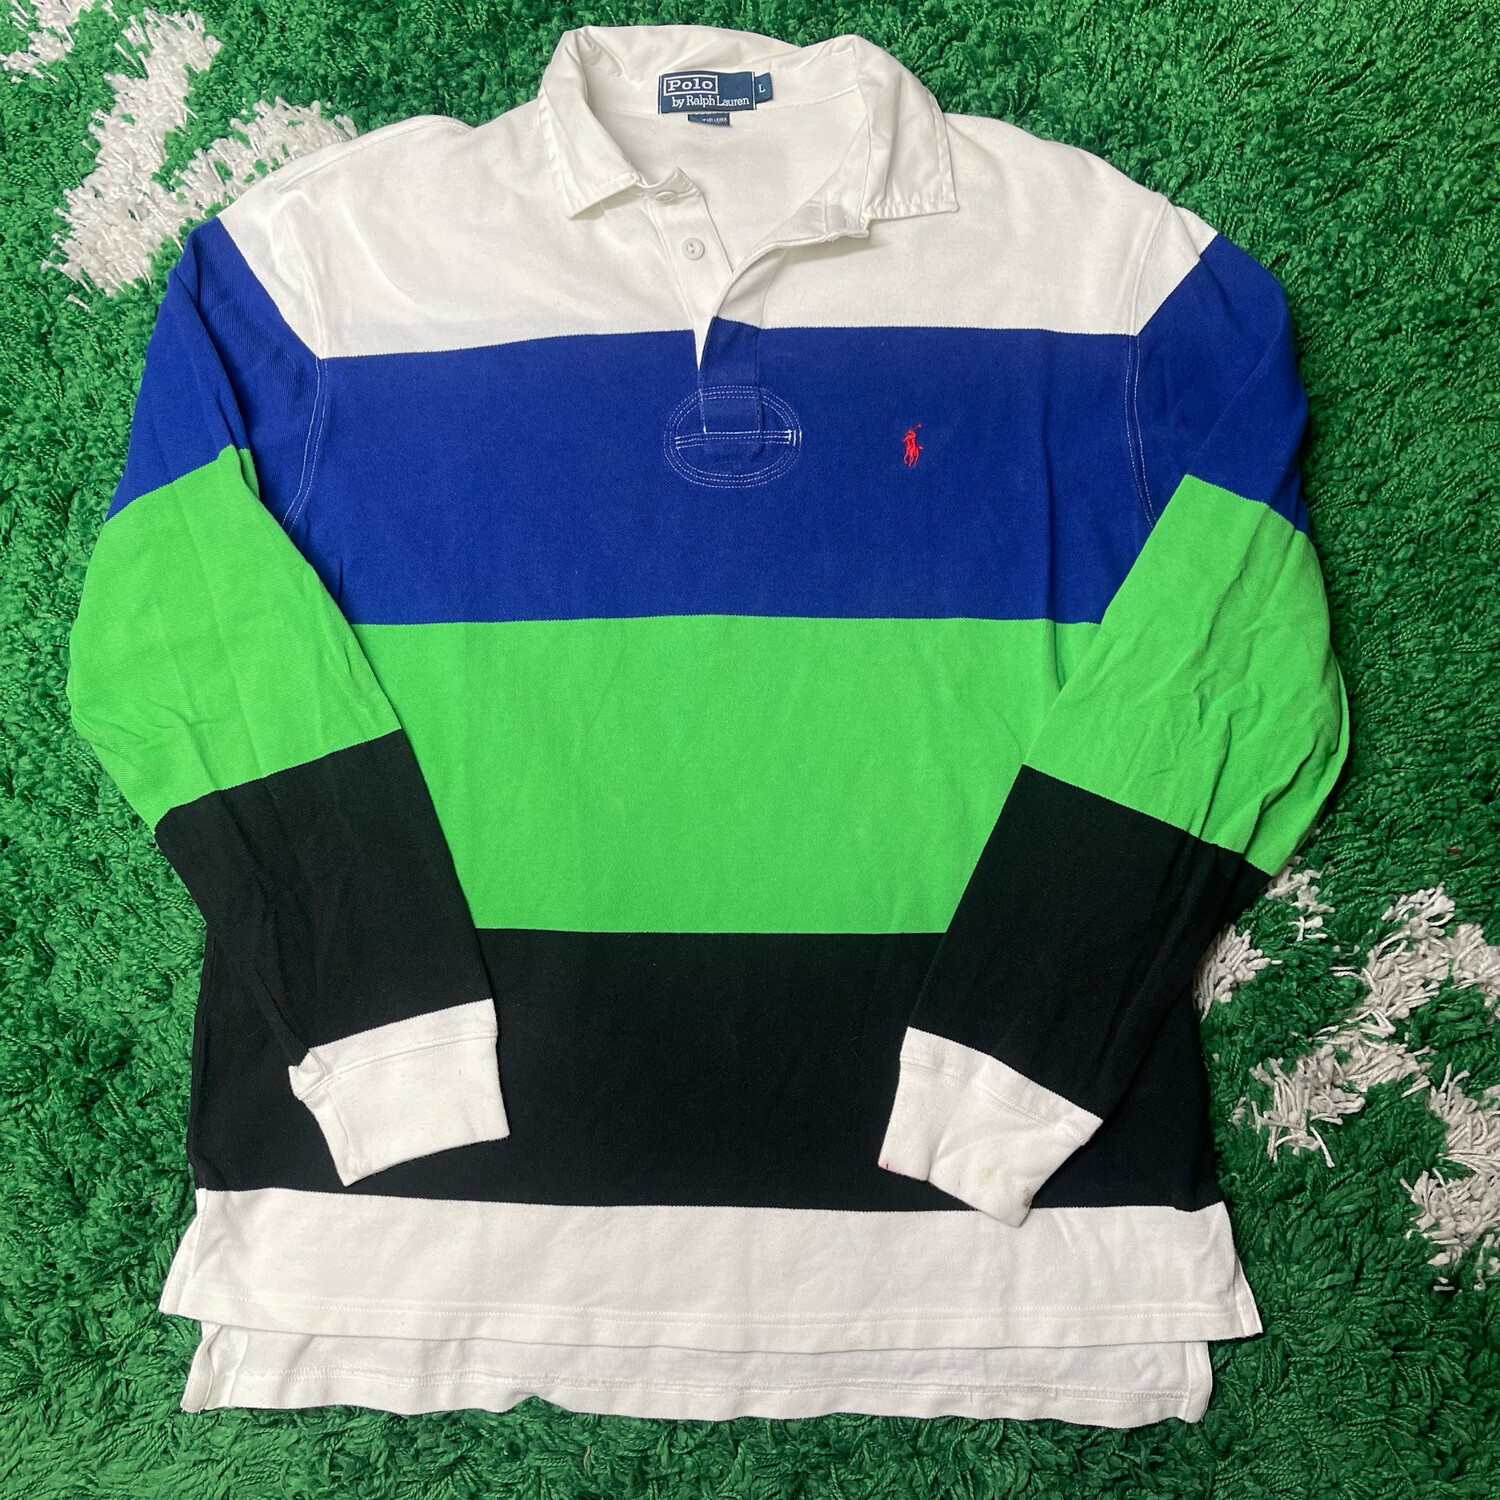 Polo Ralph Lauren Blue Green Striped Rugby Shirt Size Large